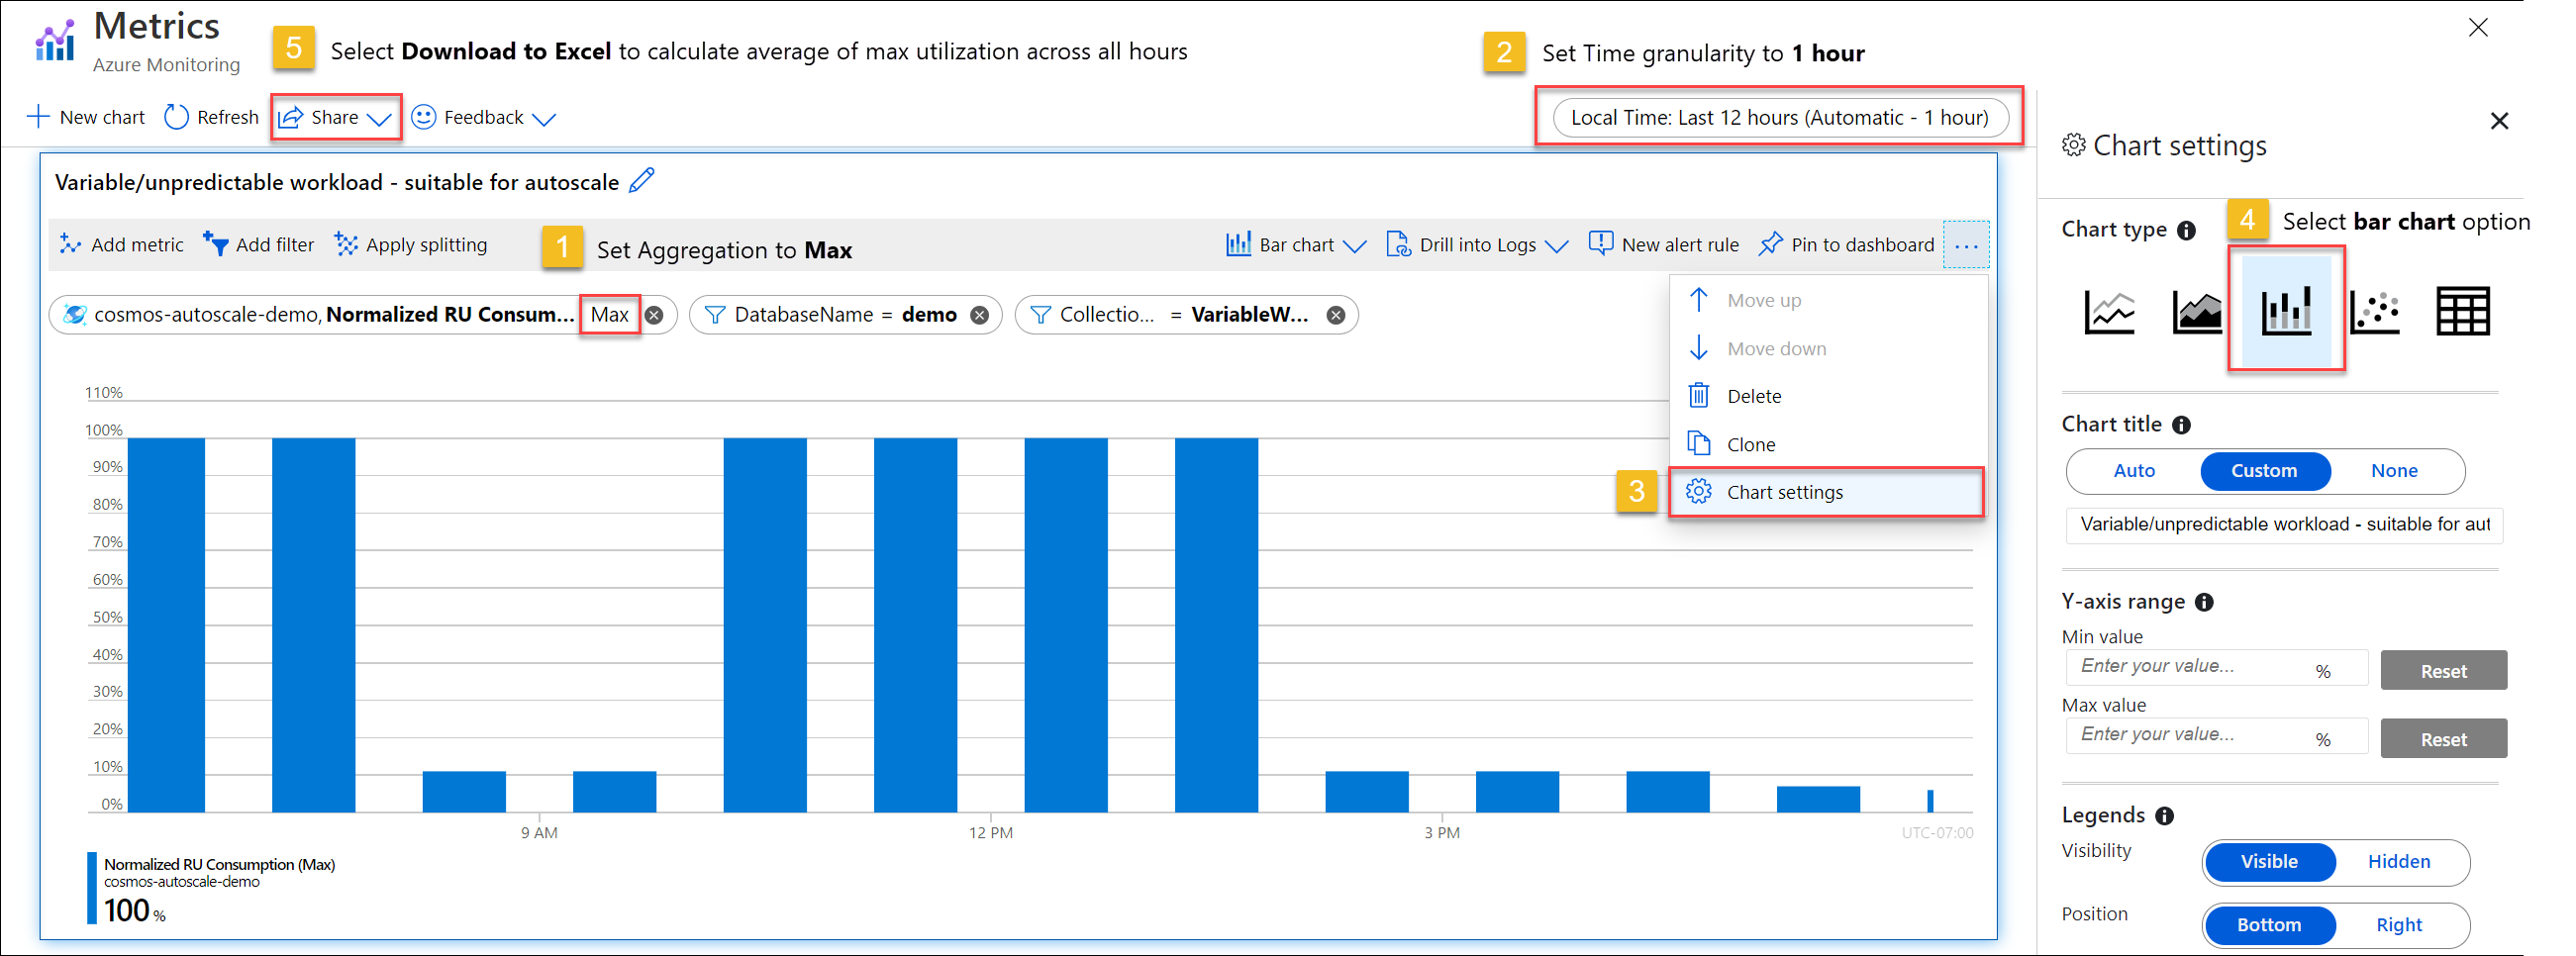 To see normalized RU consumption by hour, 1) Select time granularity to 1 hour; 2) Edit chart settings; 3) Select bar chart option; 4) Under Share, select Download to Excel option to calculate average across all hours. 